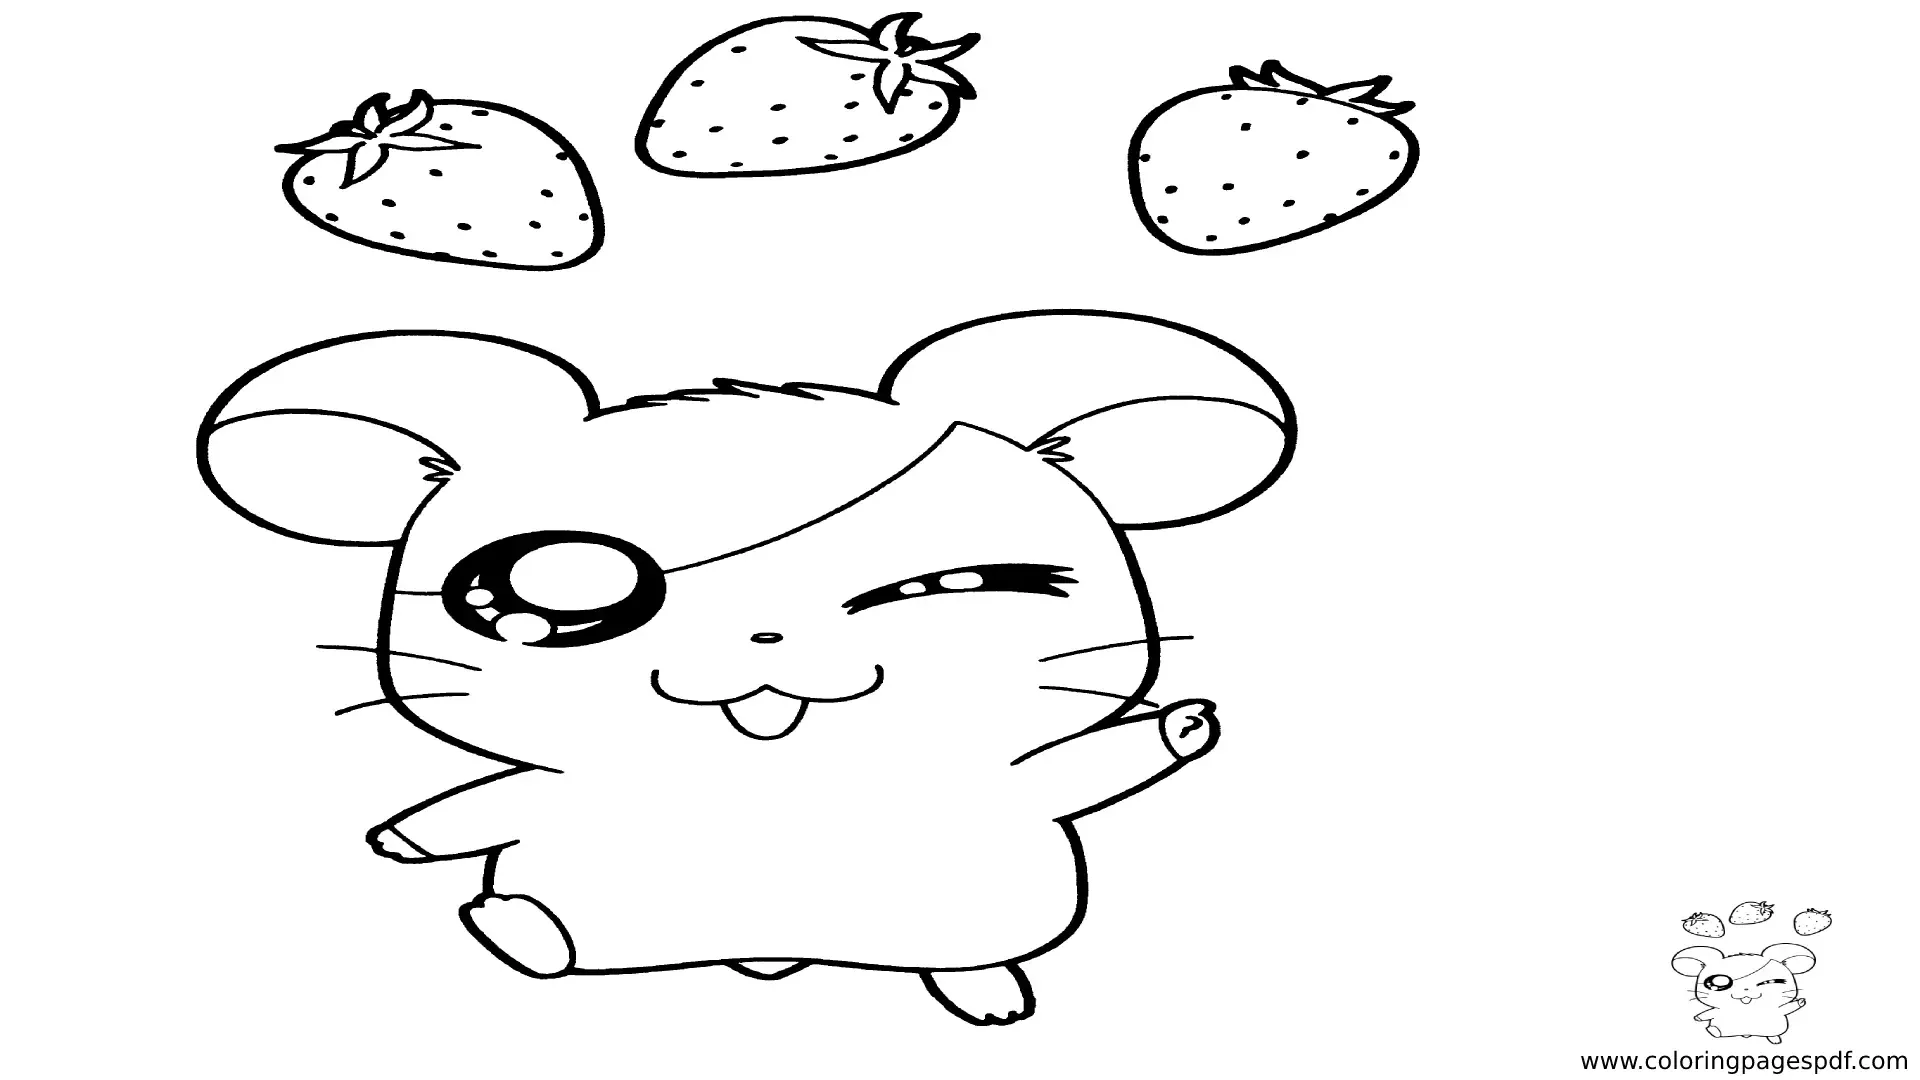 Coloring Page Of Hamtaro